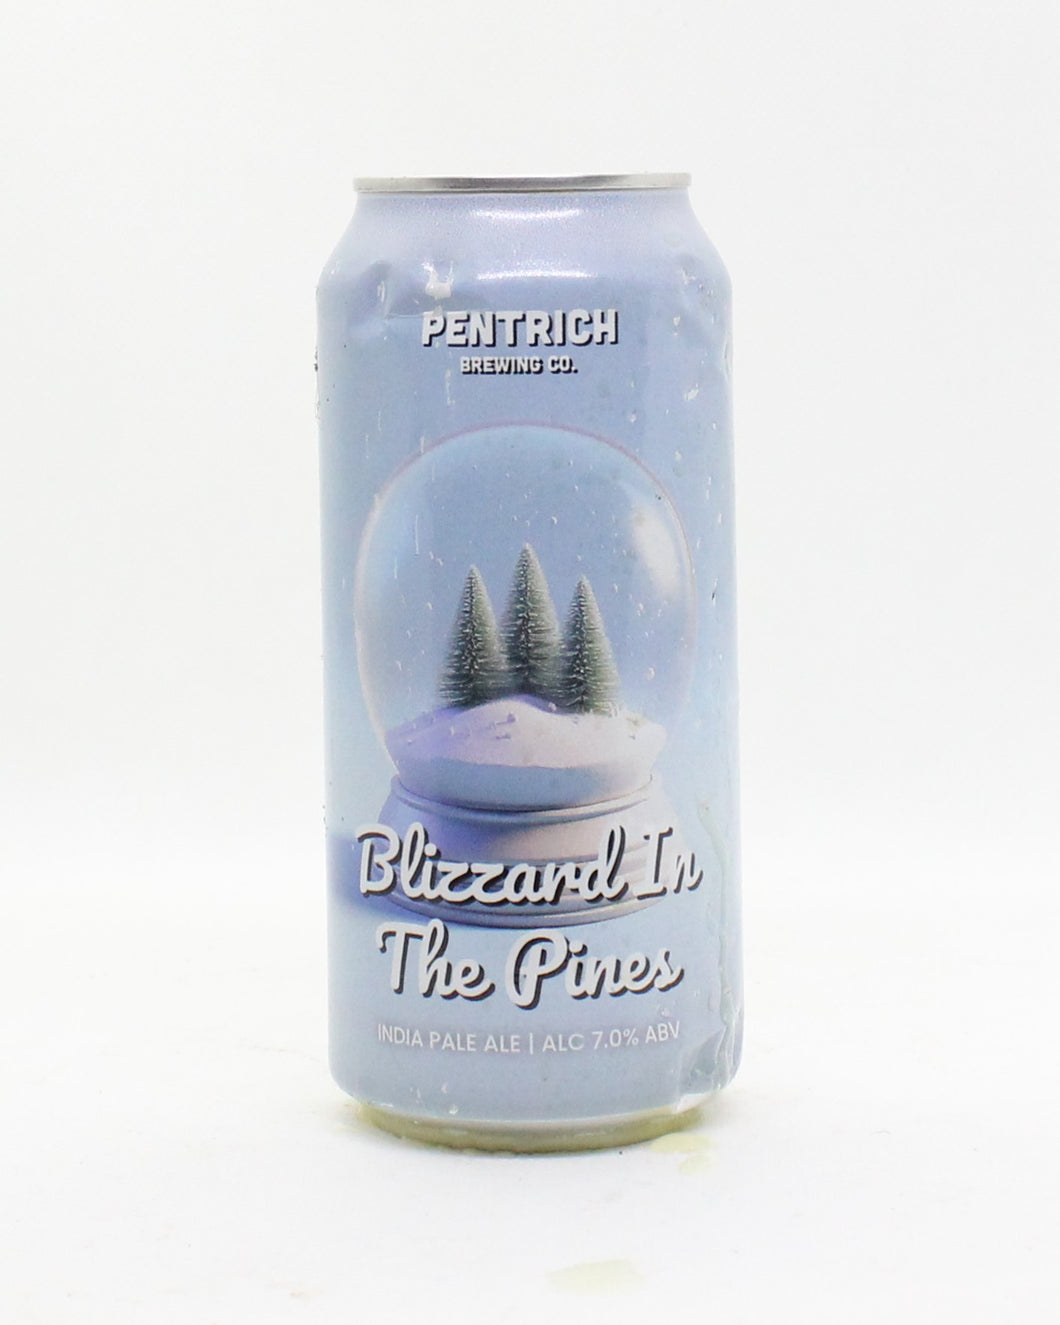 Pentrich Blizzard In The Pines